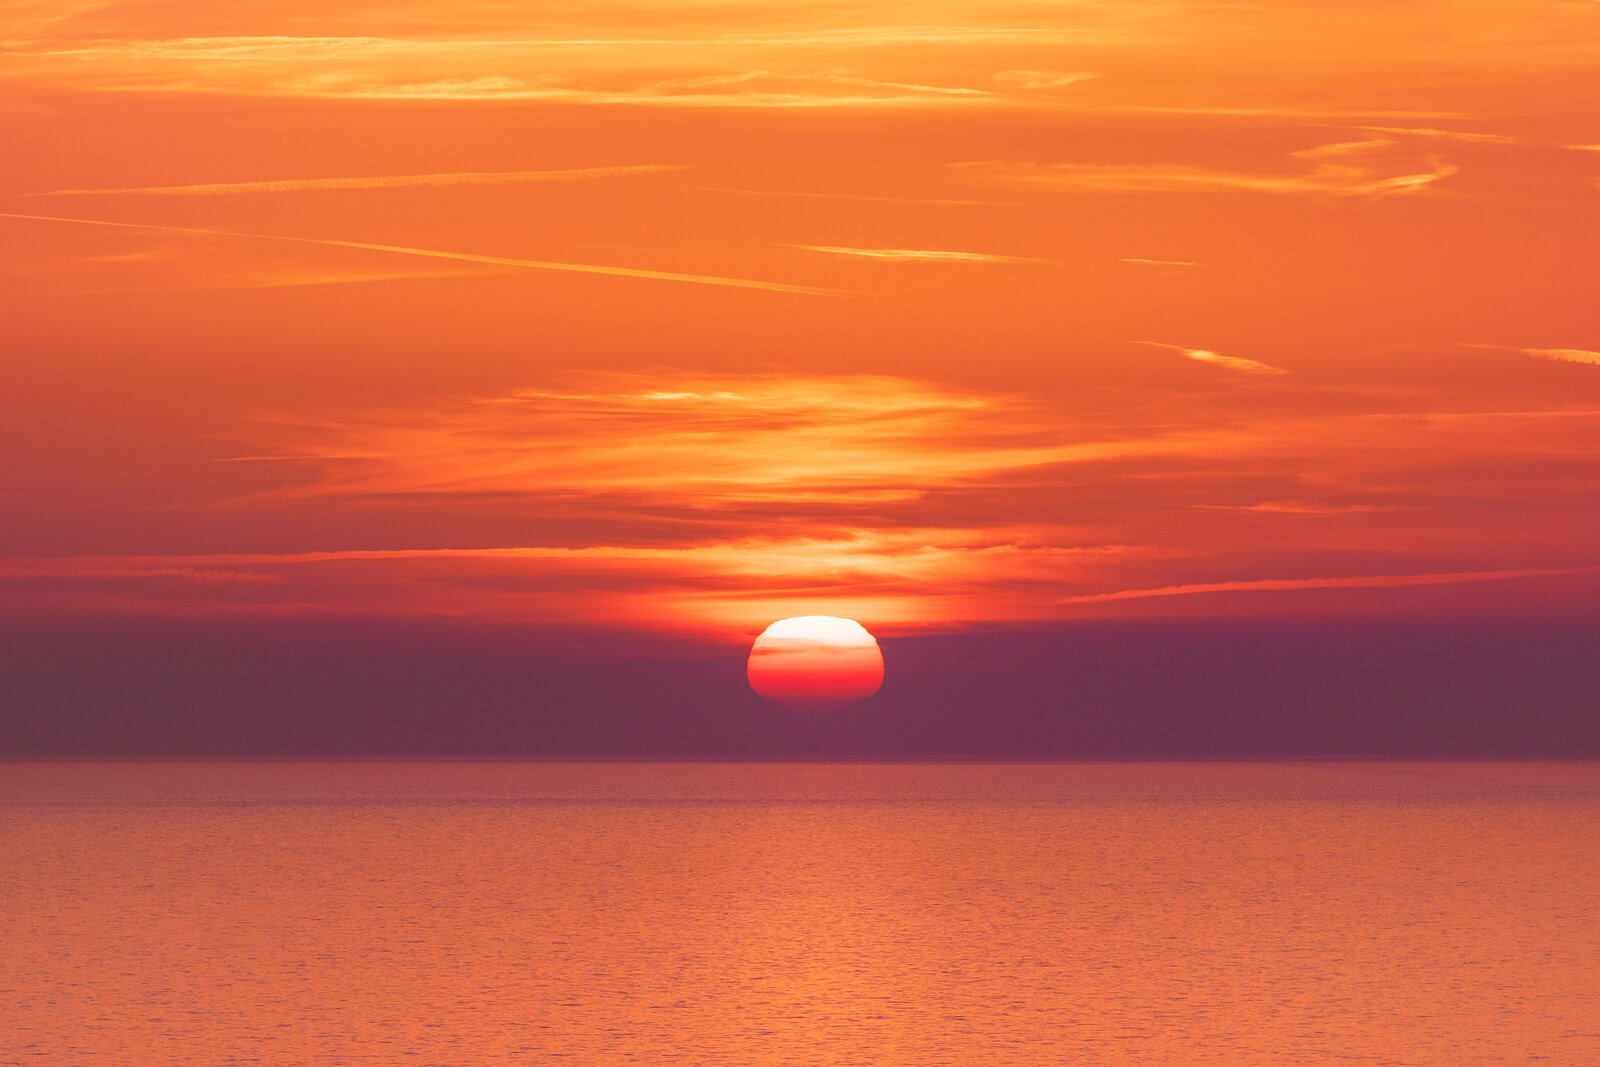 LinkedIn Elevate is Sunsetting: What You Need to Know